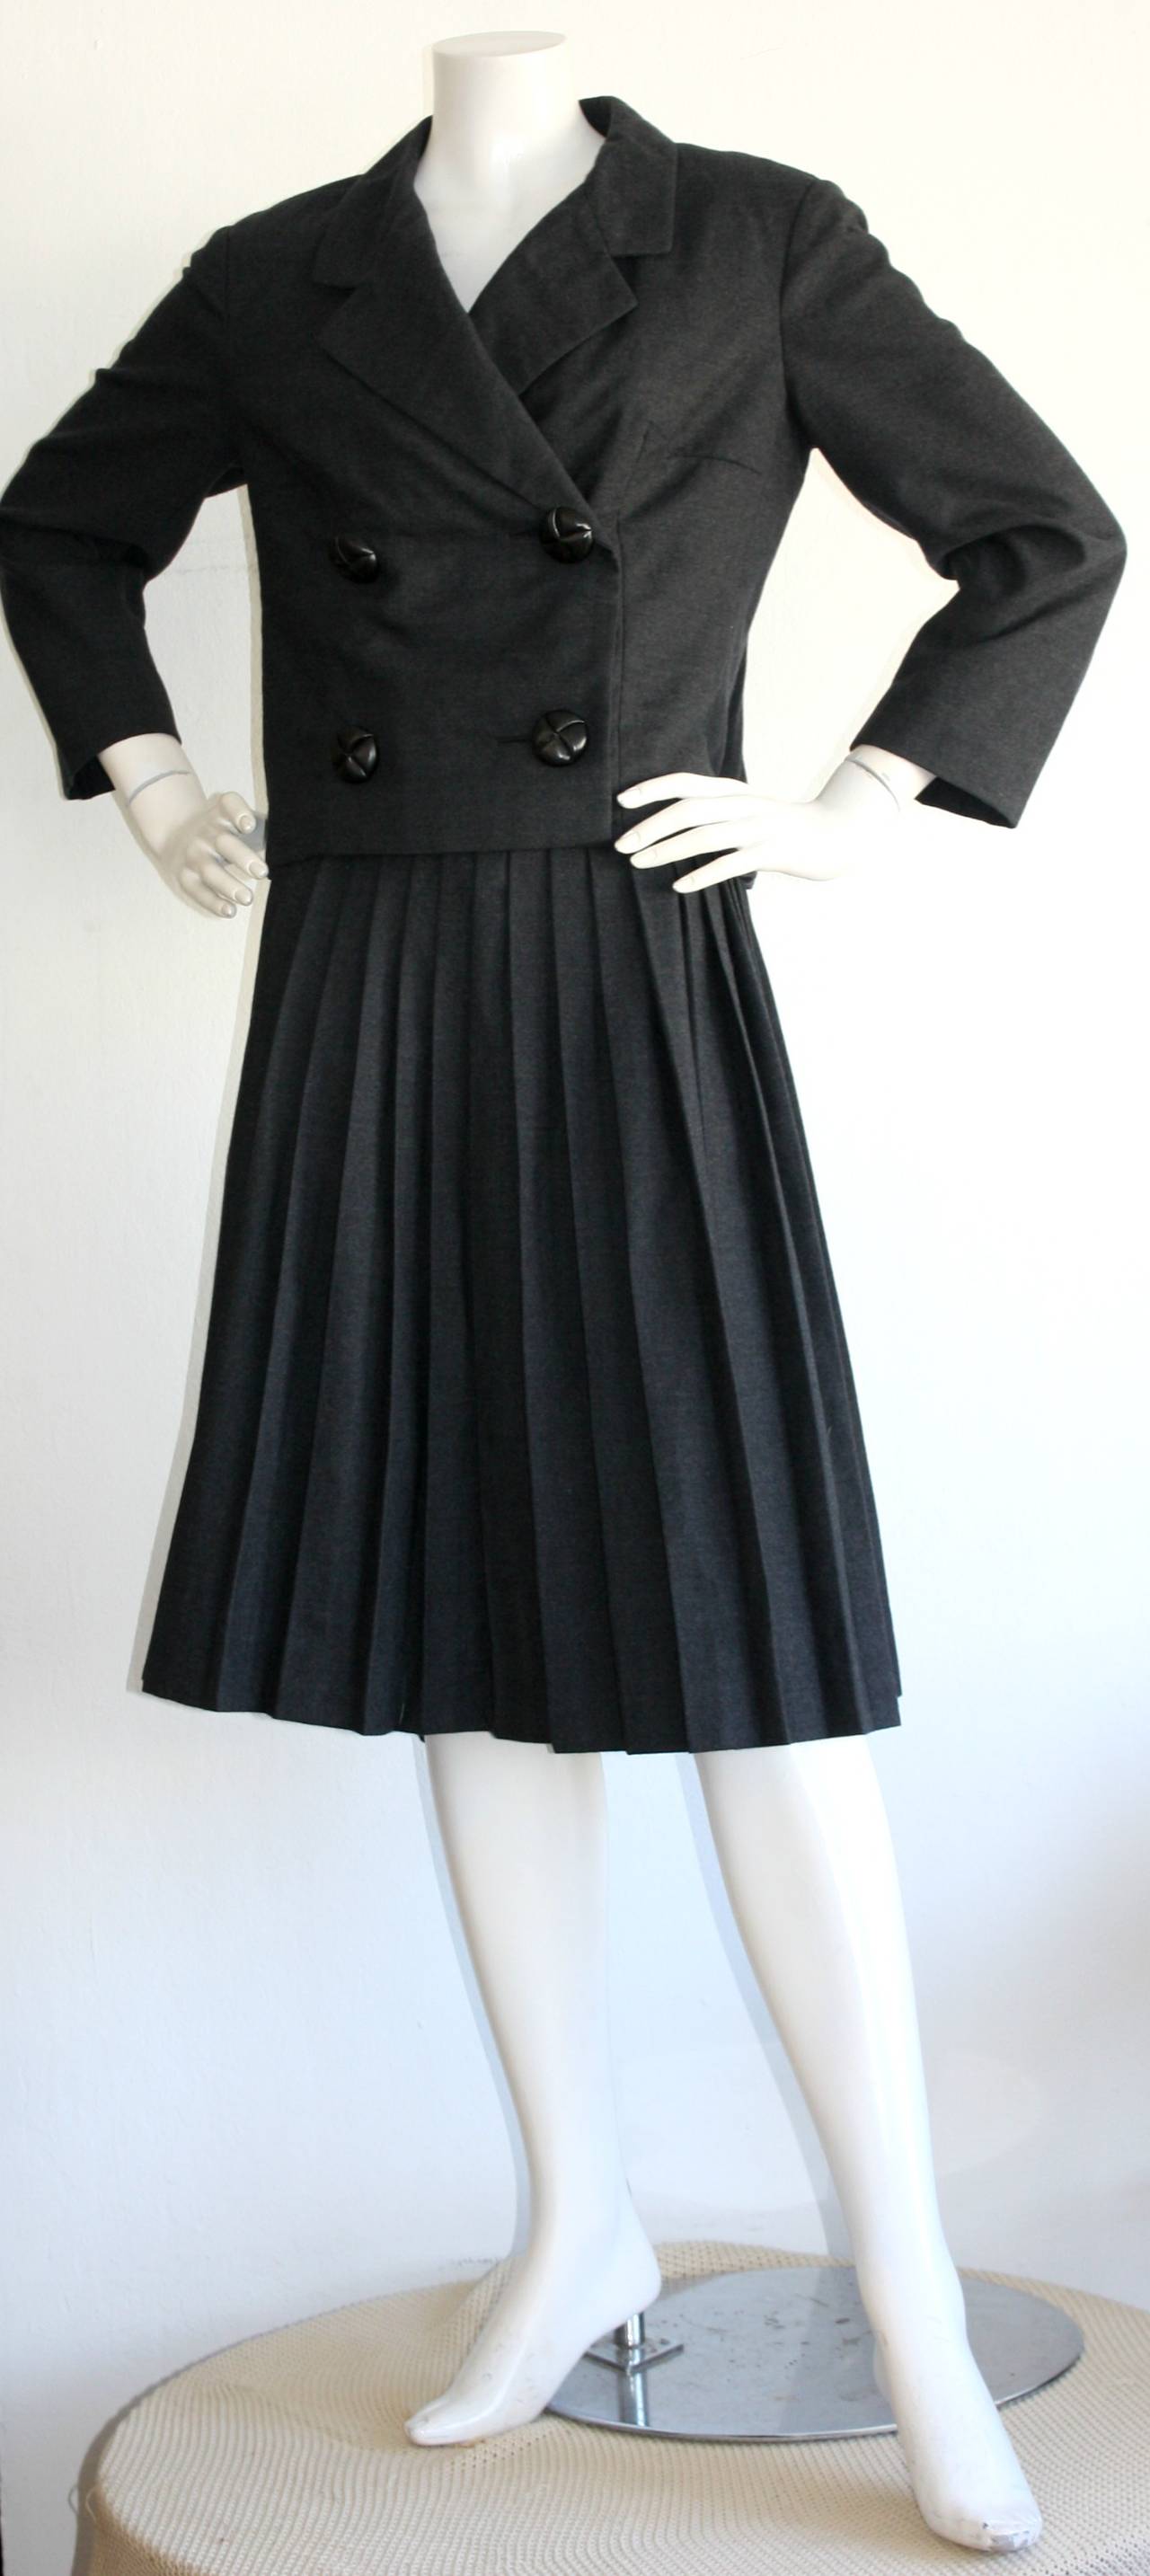 Rare, iconic vintage Christian Dior Charcoal Grey skirt suit from the 1960s! Wonderful pillbox cropped jacket, with full accordion pleated skirt. Chic oversized Double Breasted buttons on jacket. Also features original Neiman Marcus label. Fully